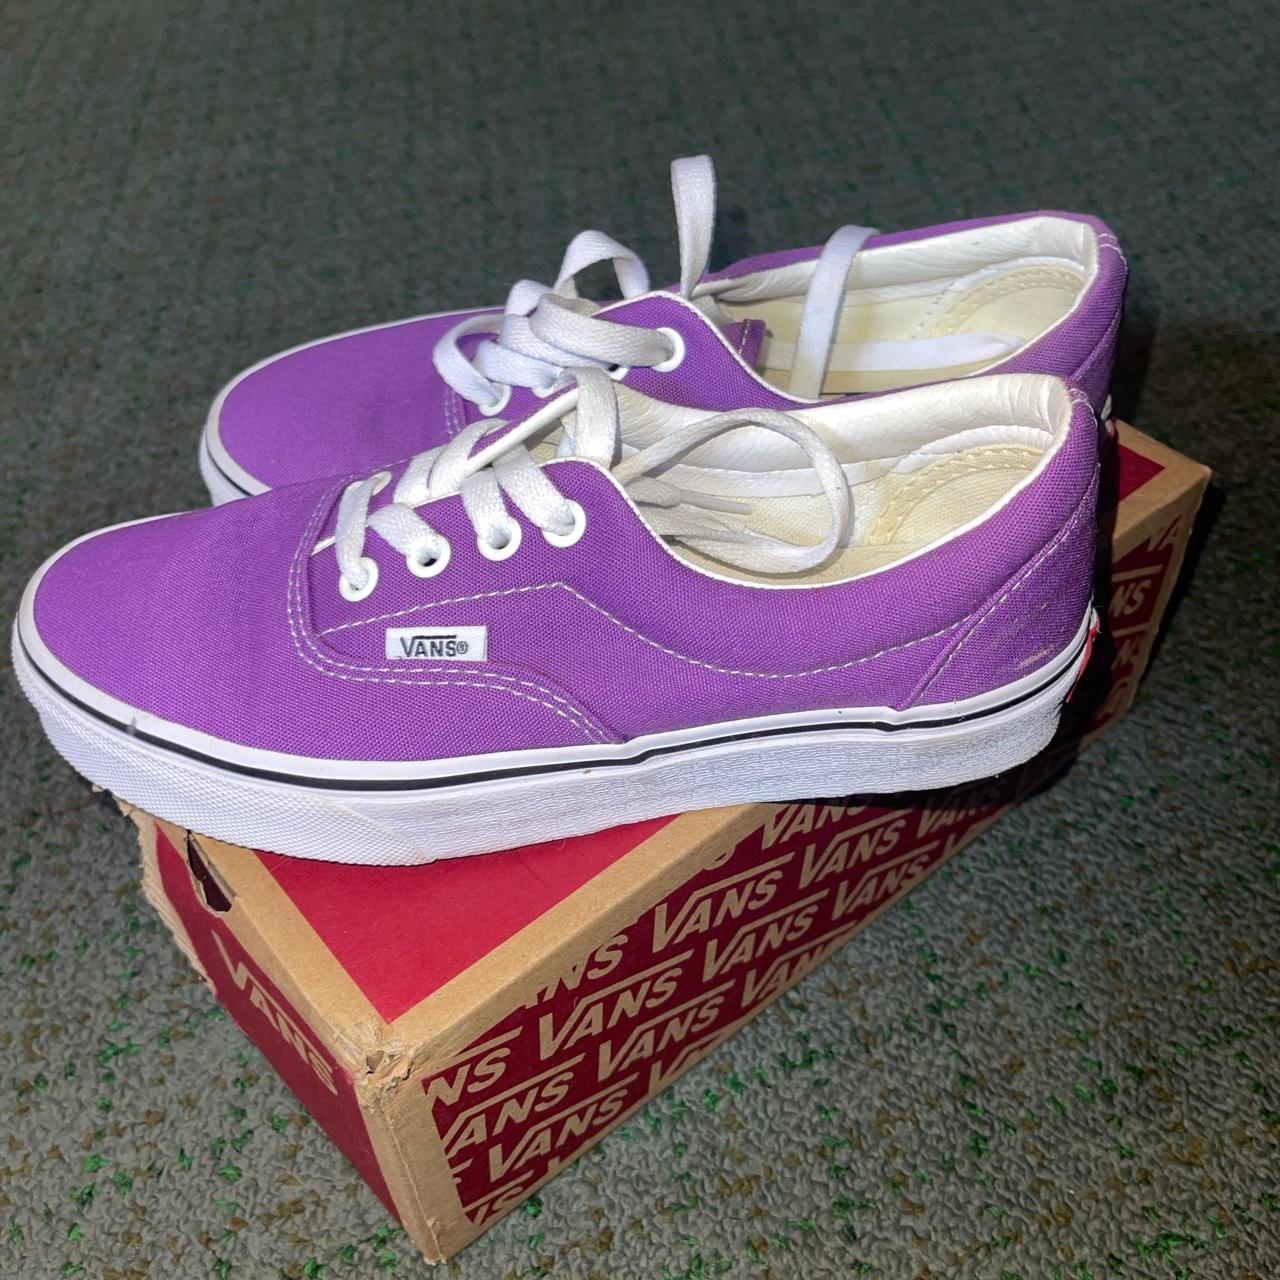 Vans Women's First-shoes-baby-shoes | Depop